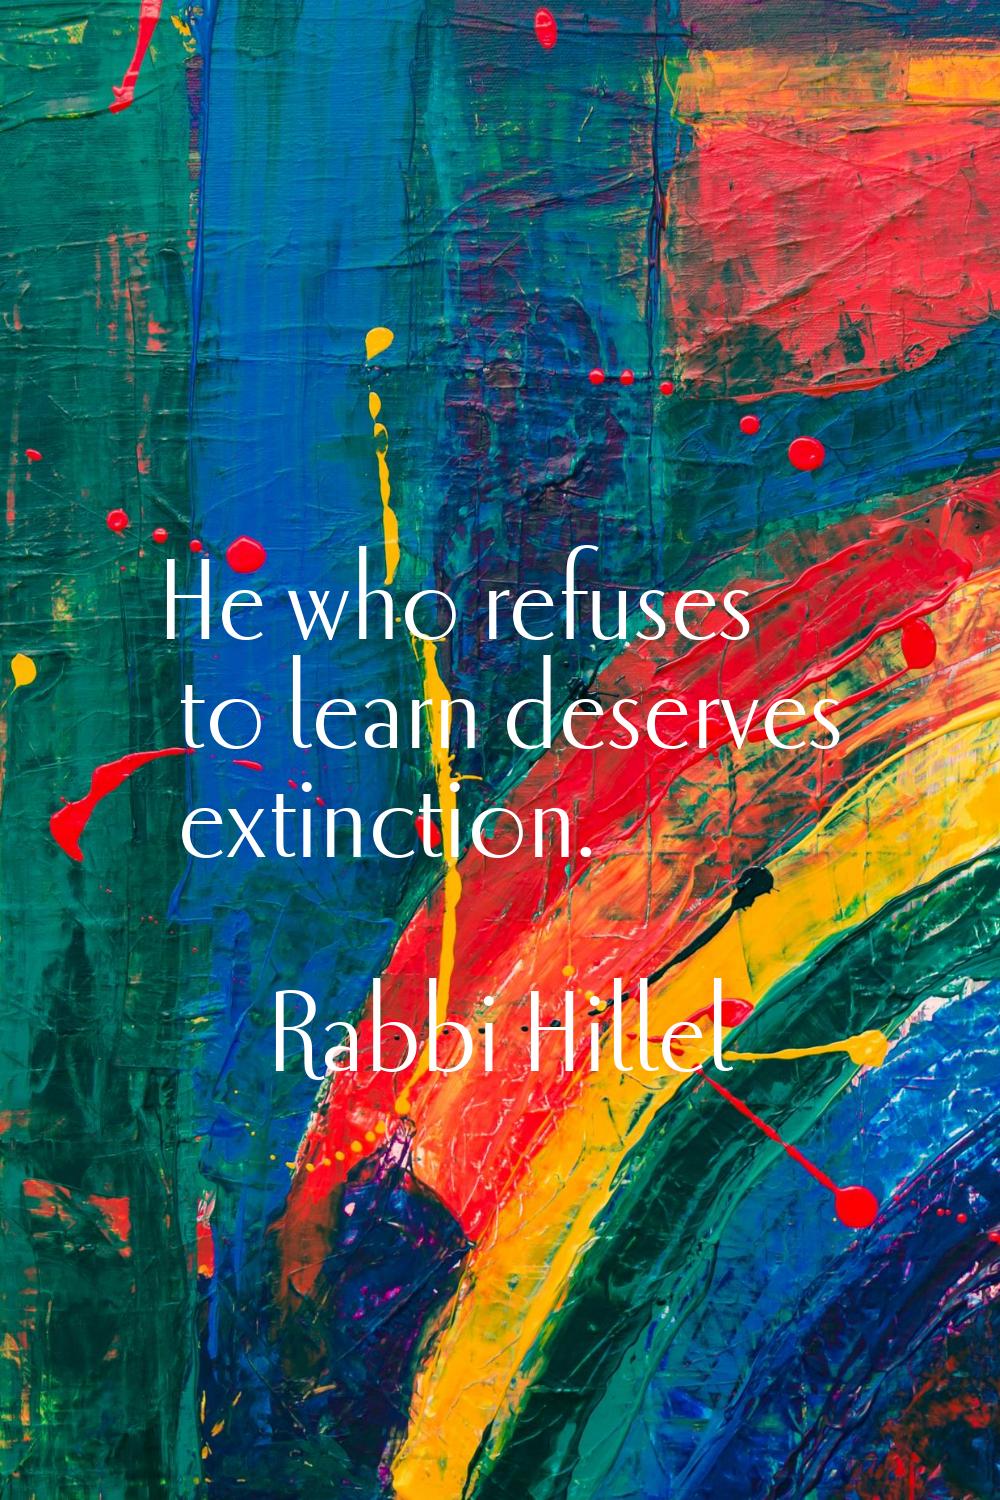 He who refuses to learn deserves extinction.